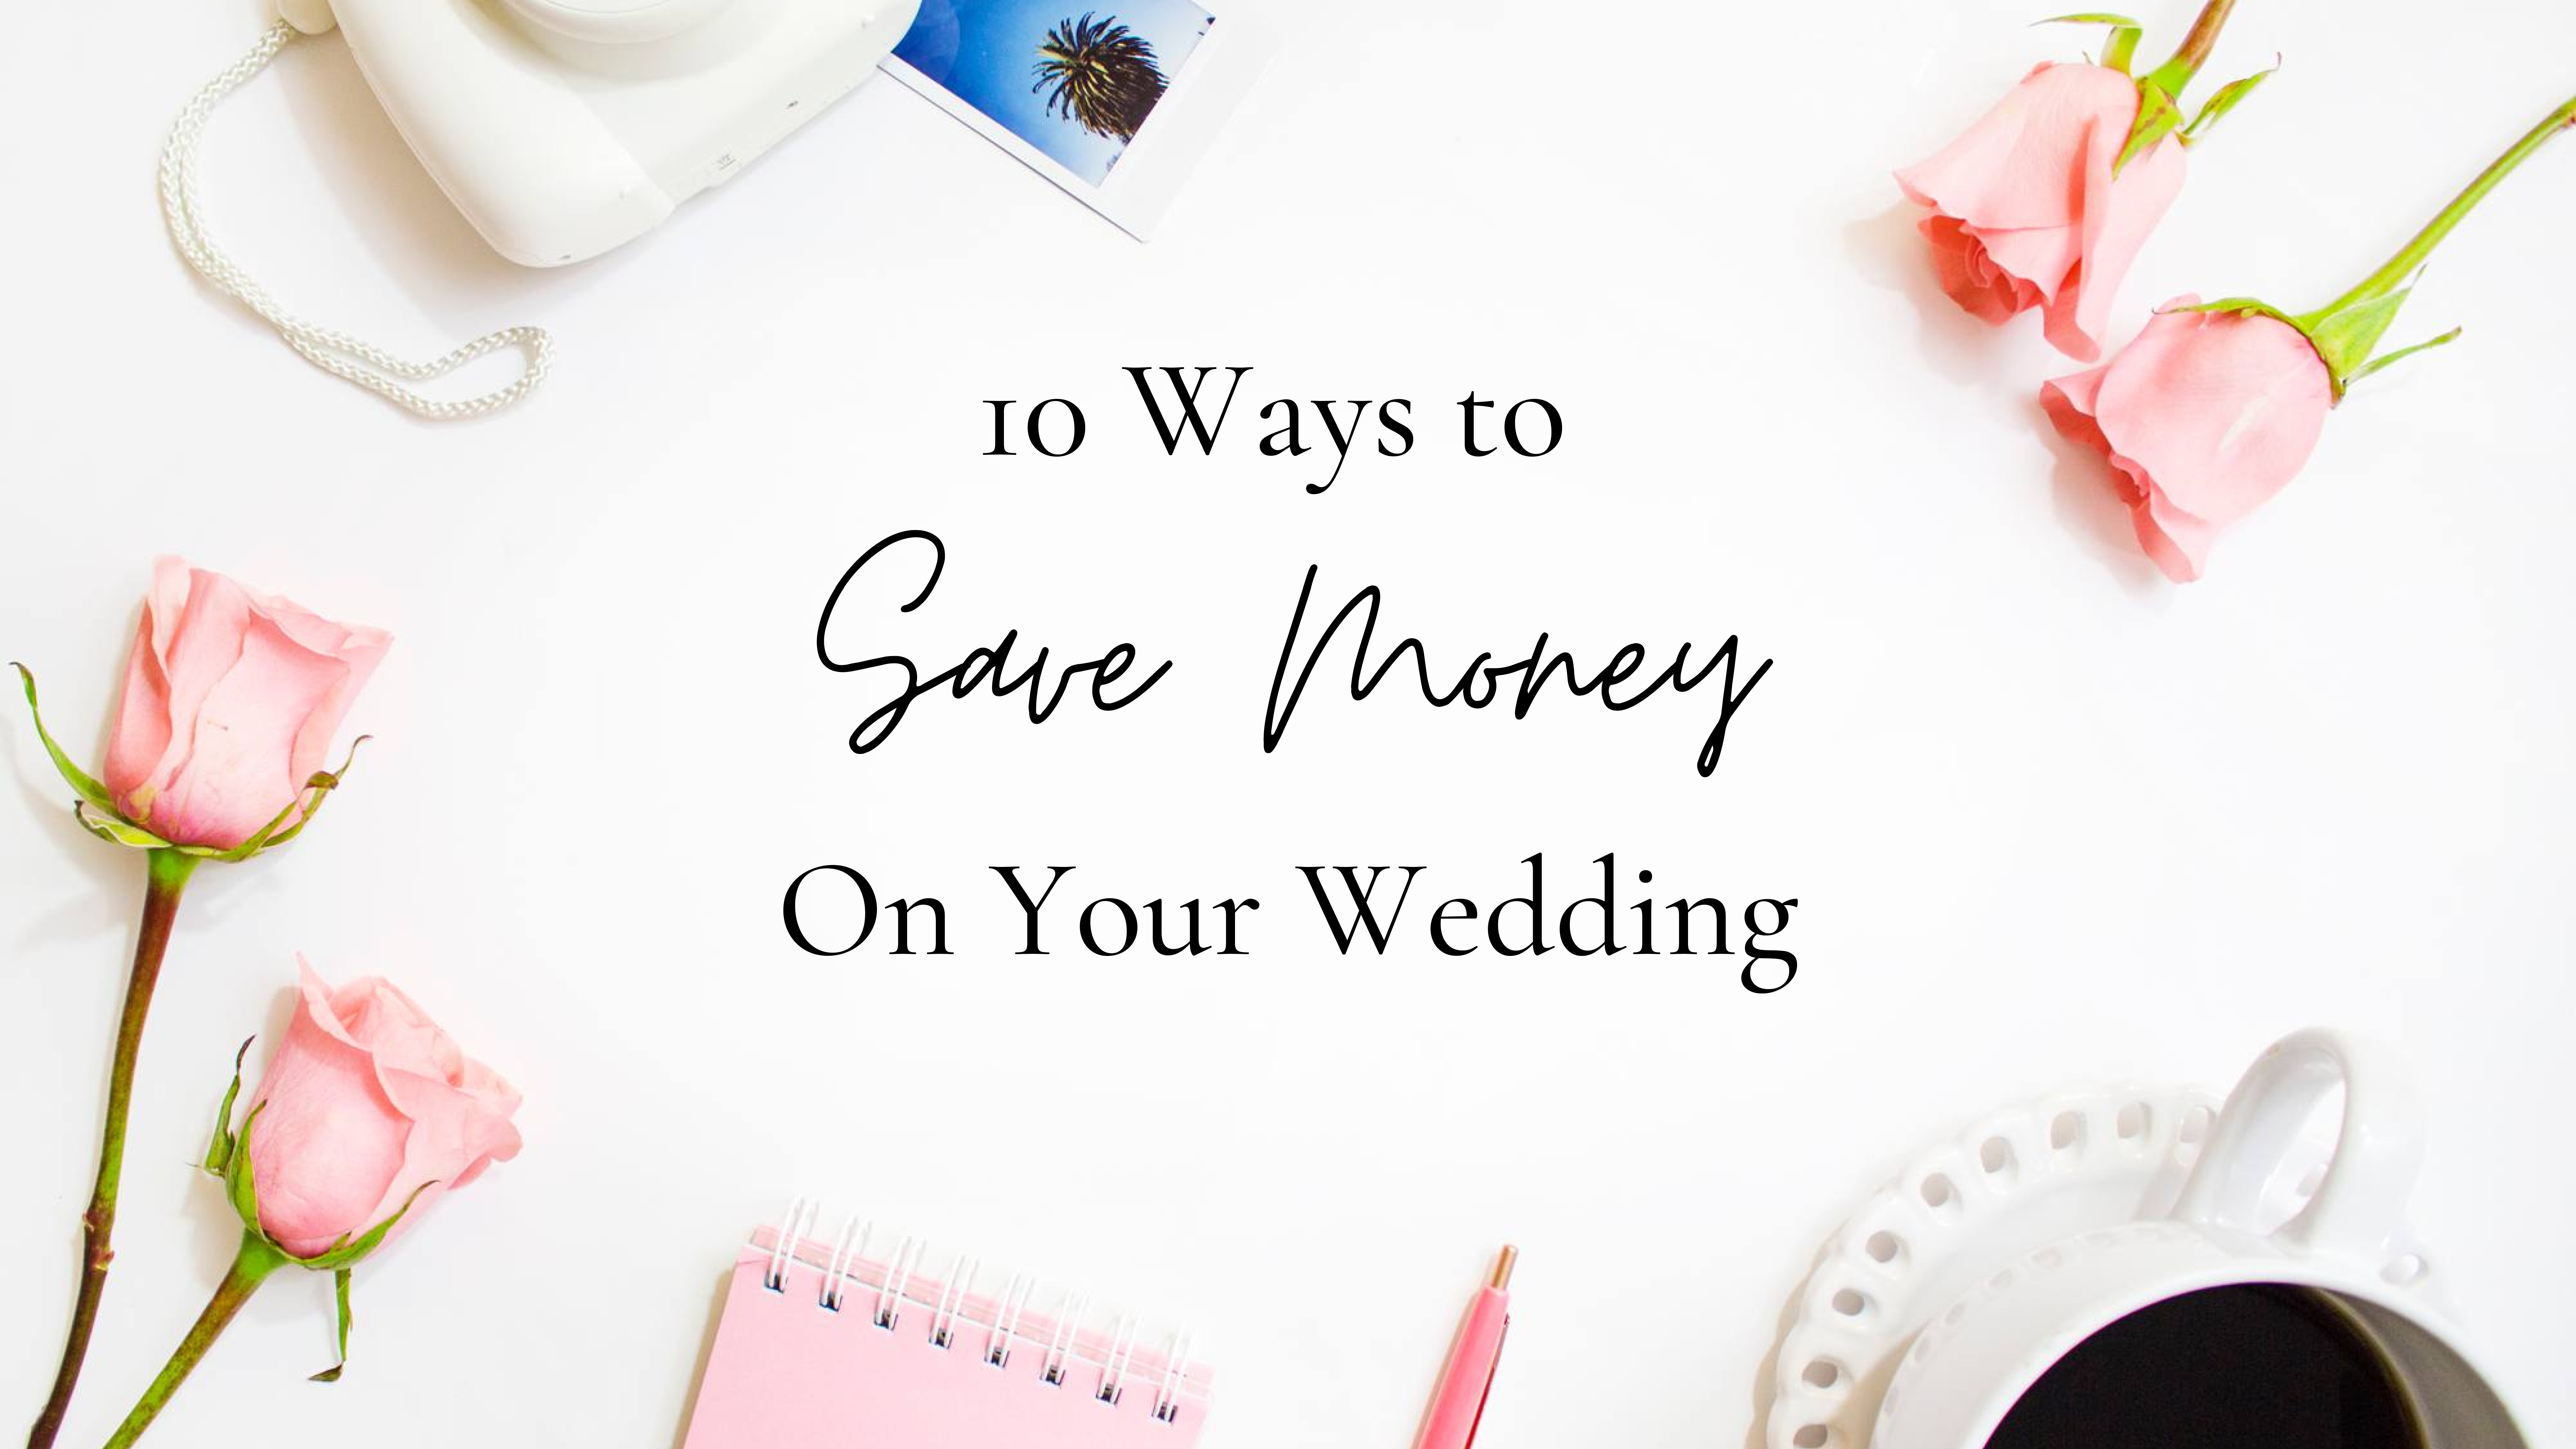 10 Ways to Save Money on Your Wedding